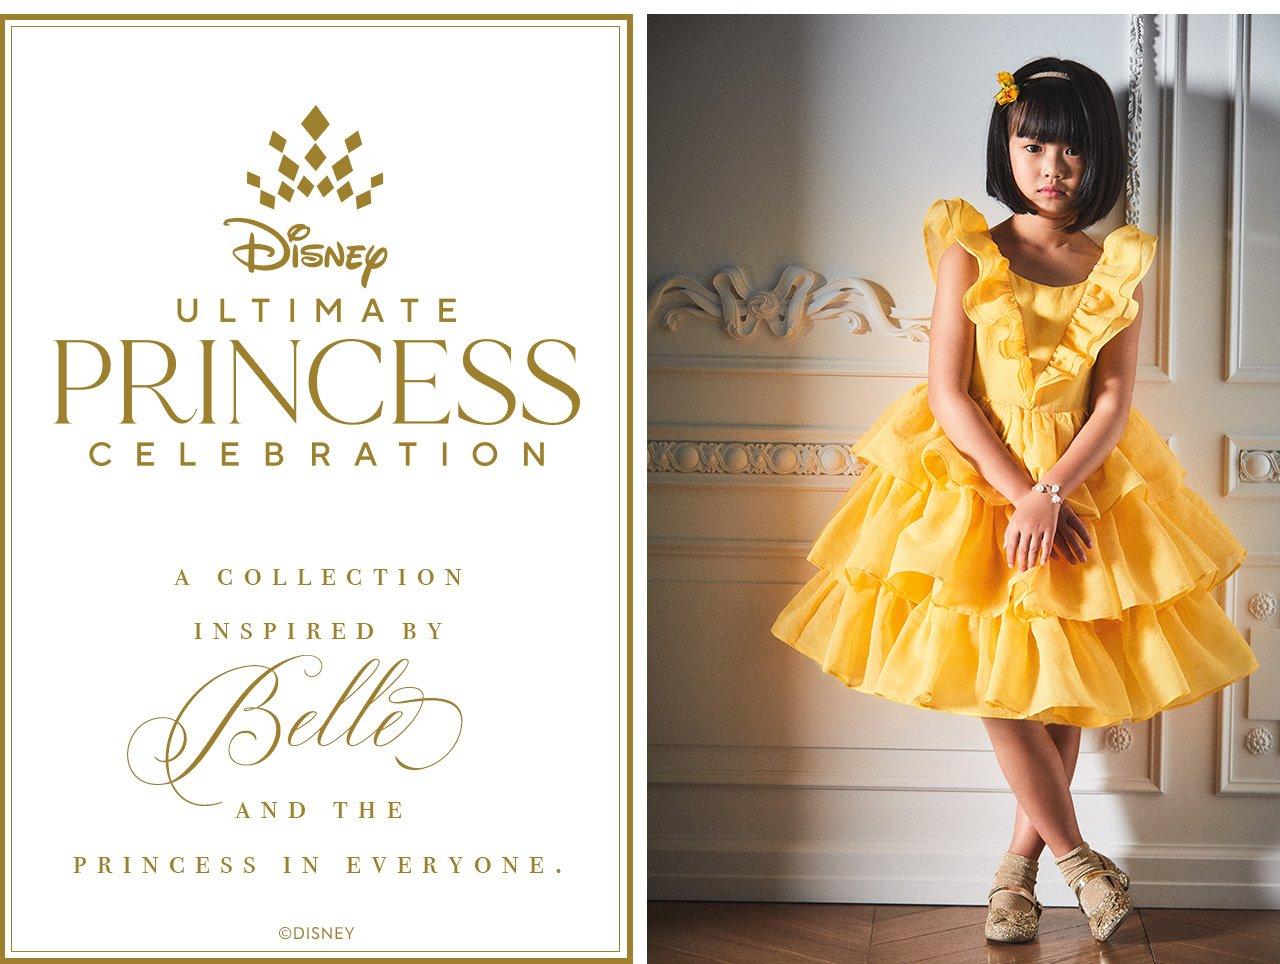 Disney Ultimate Princess Celebrations. A collection inspired by Cinderella and the princess in everyone.